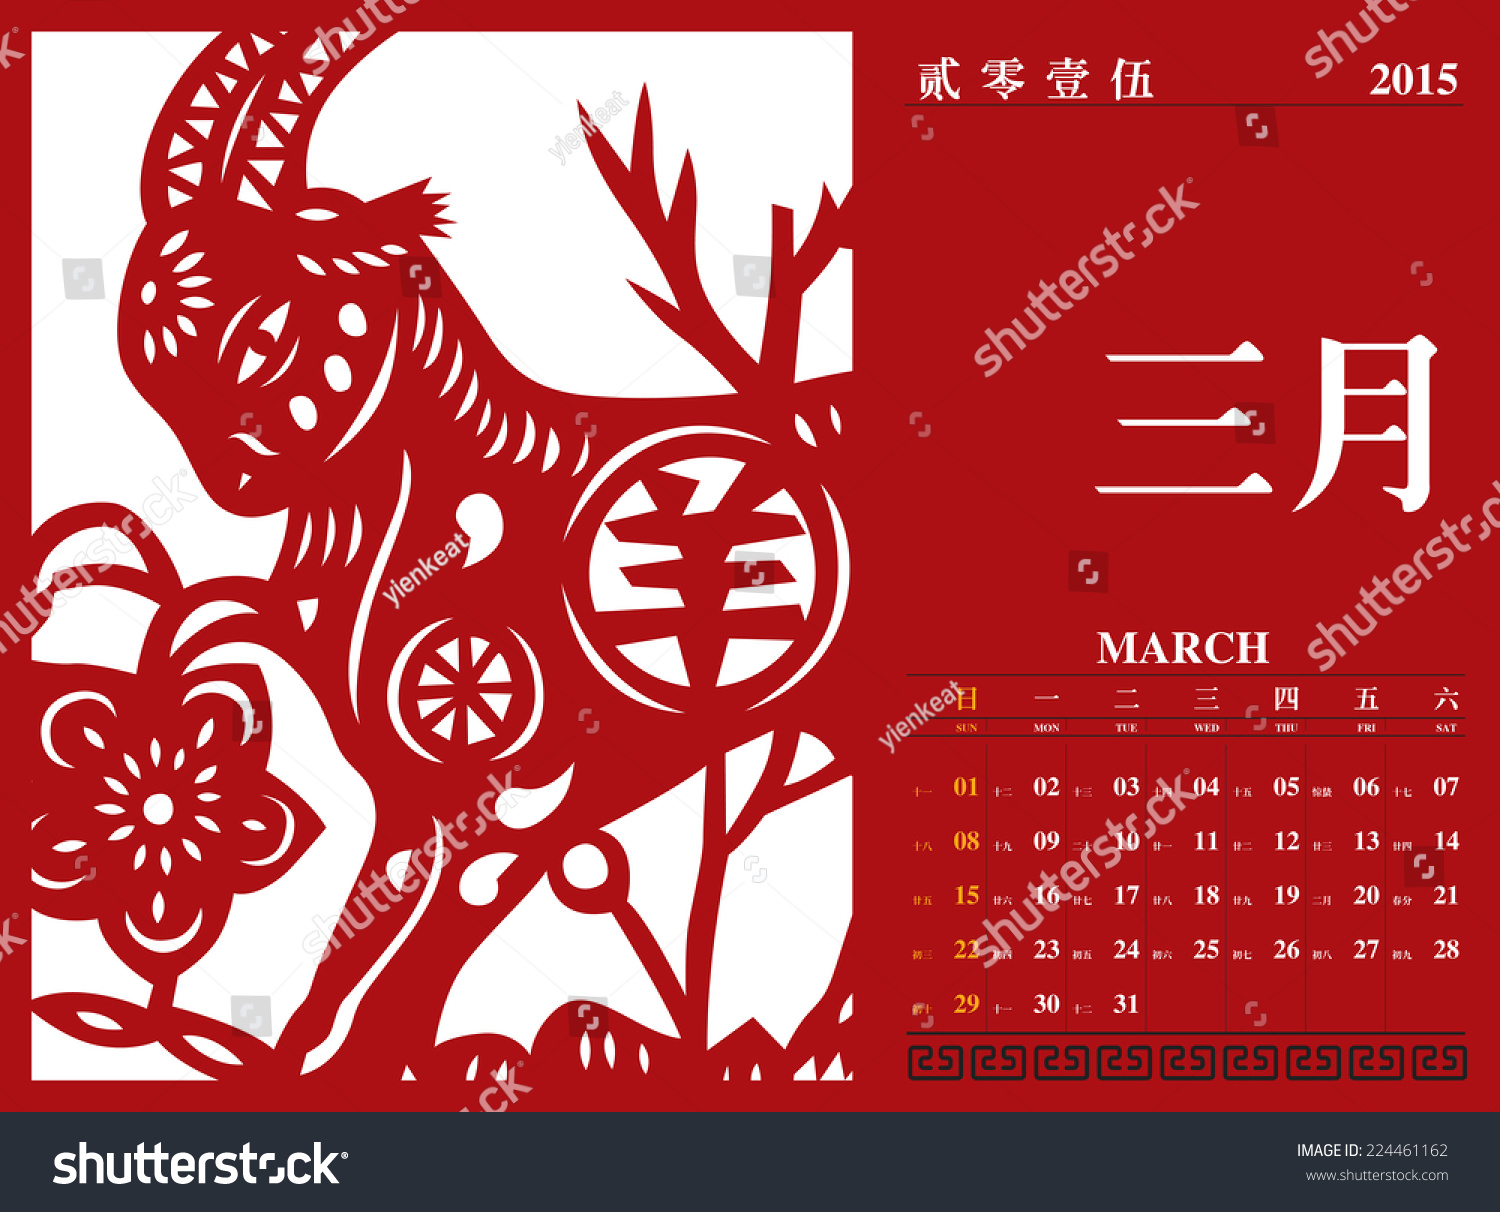 Vector Chinese Calendar 2015 The Year Of The Goat Translation: March